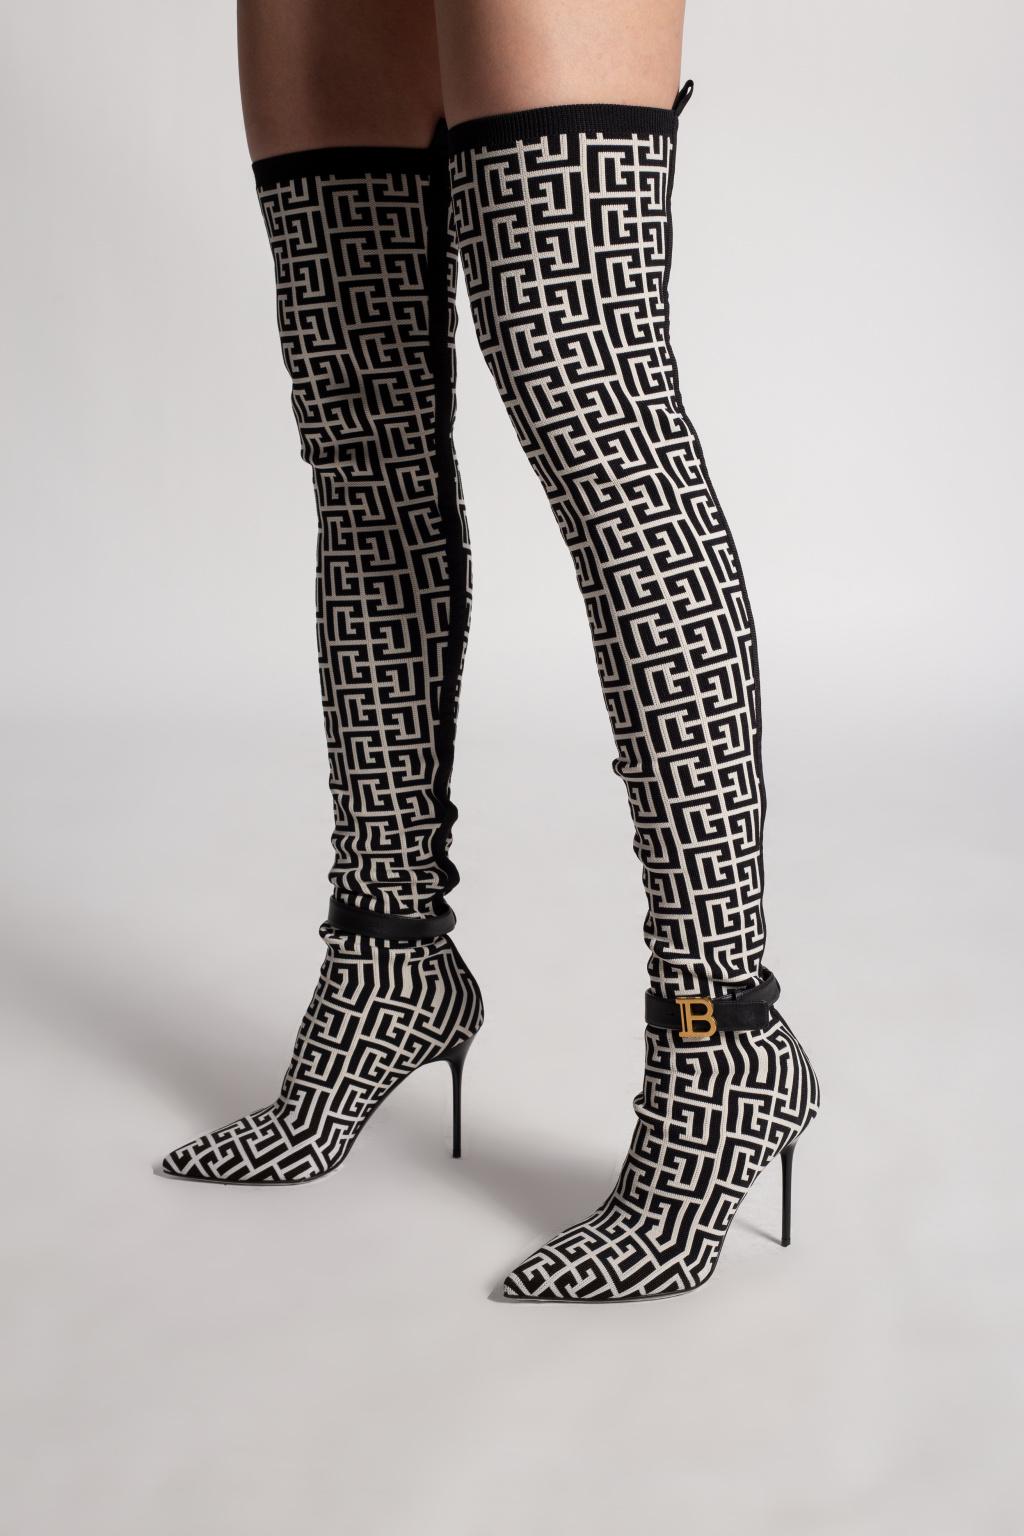 styrte pave Pest Balmain 'raven' Over-the-knee Boots in Black | Lyst